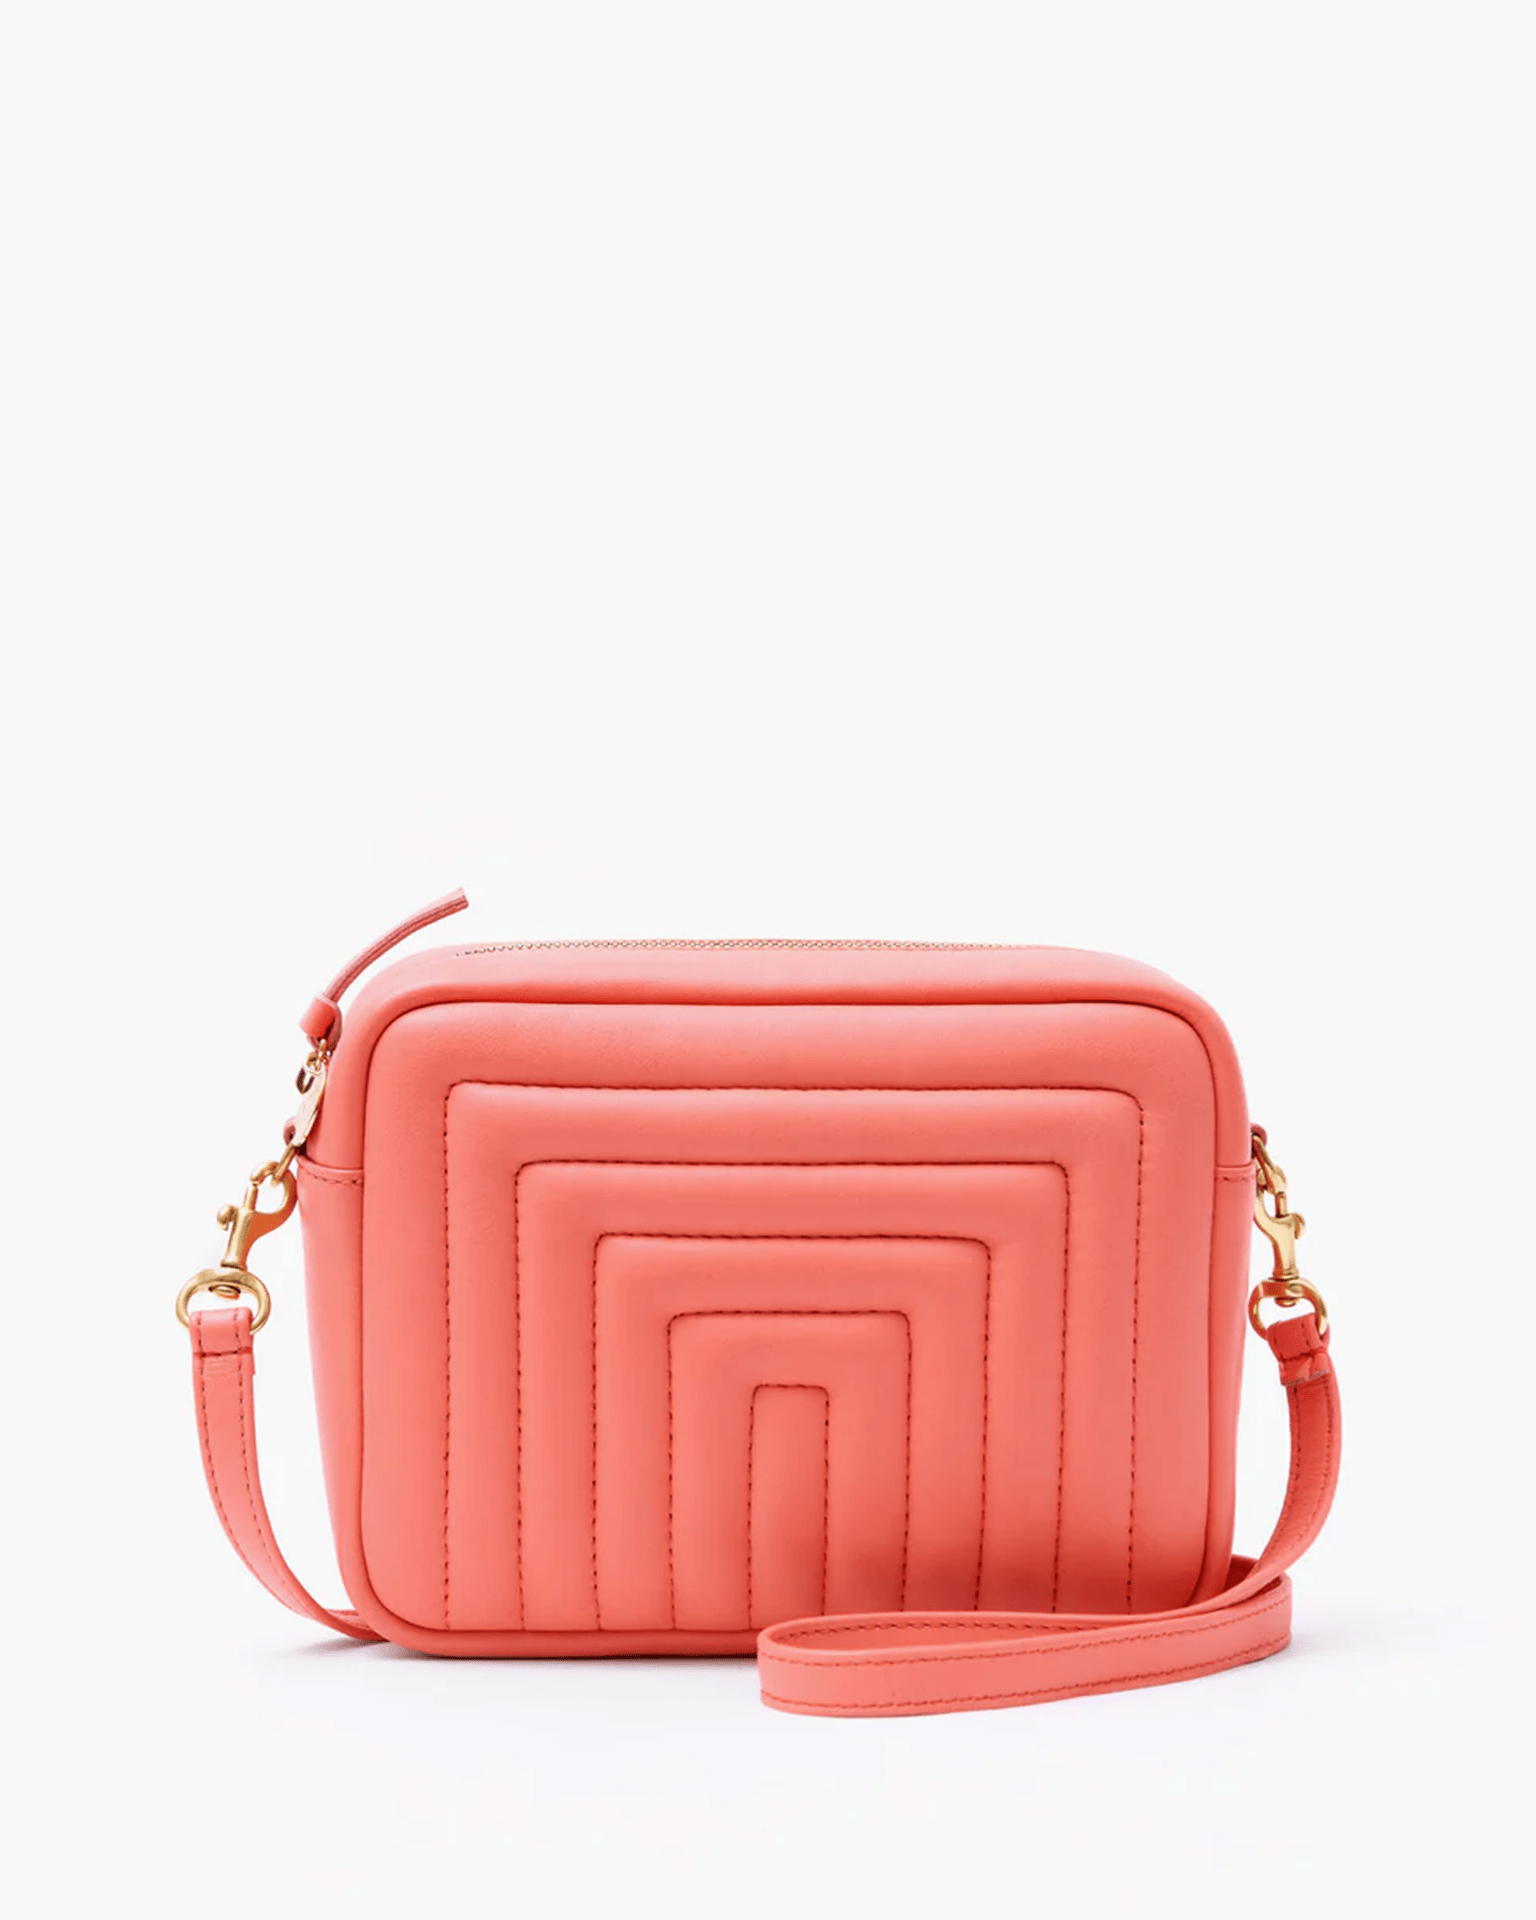 Midi Sac in Bright Coral Channel Quilted Nappa